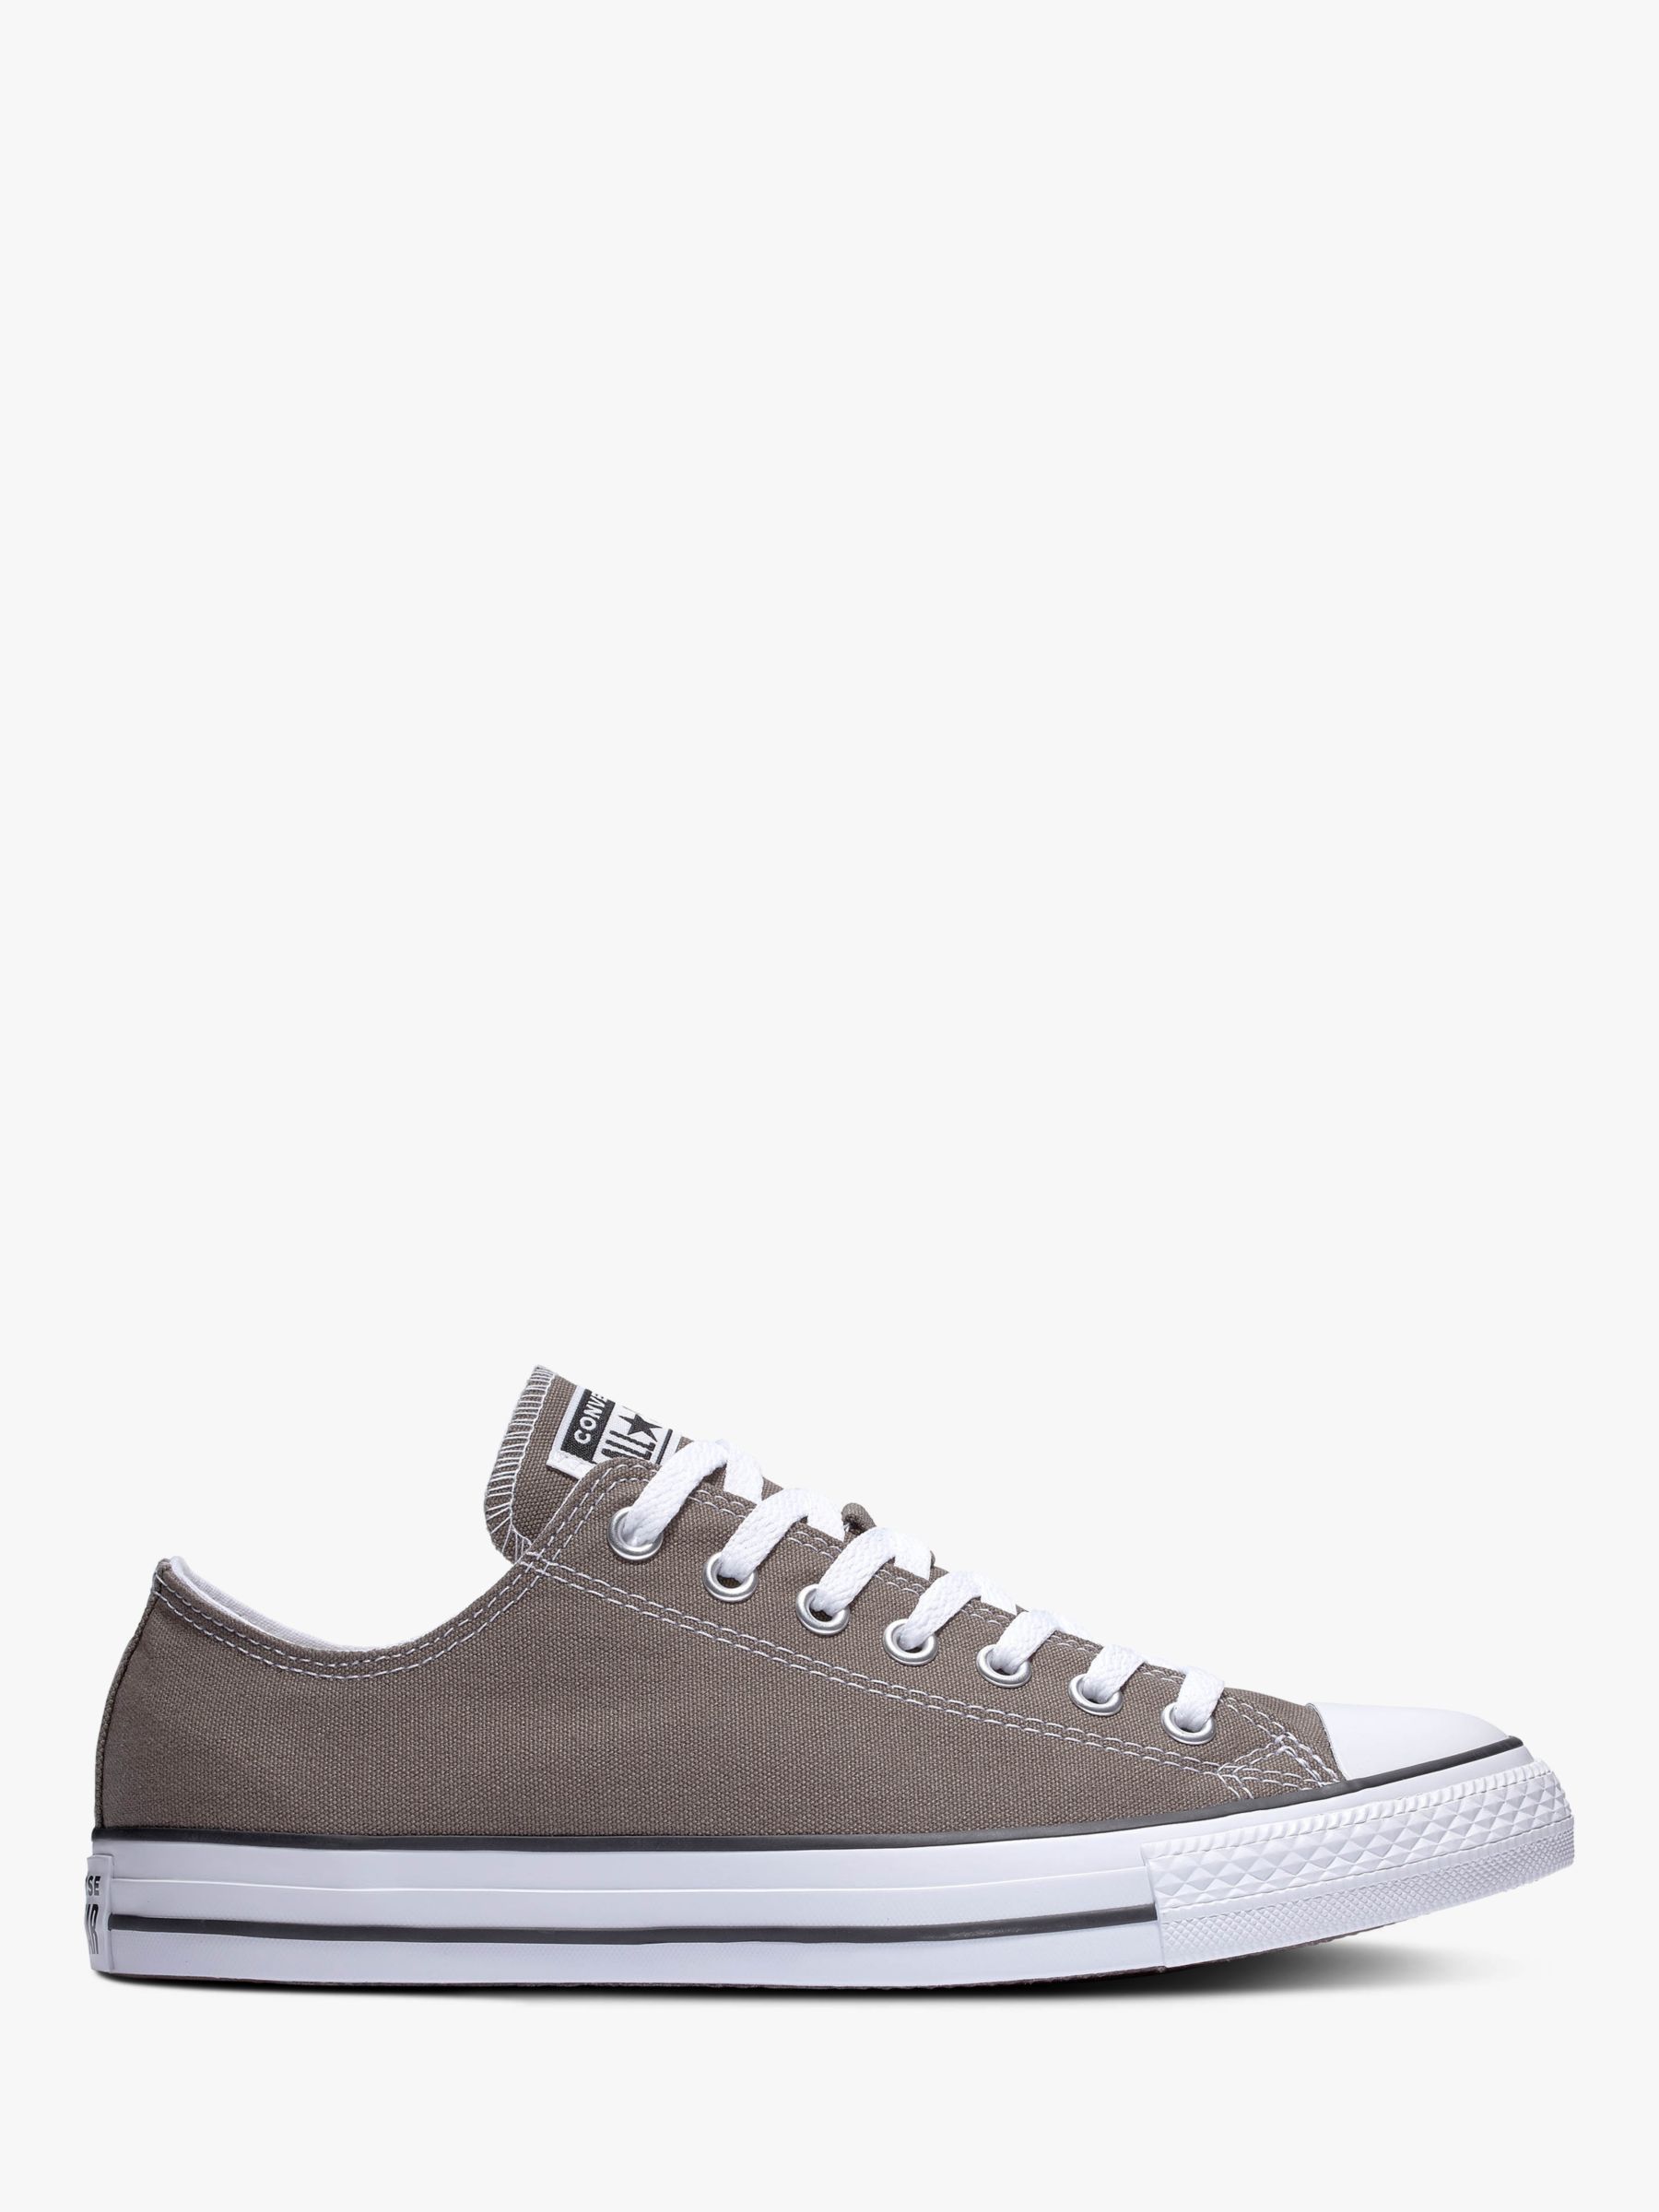 converse chuck taylor all star ox low